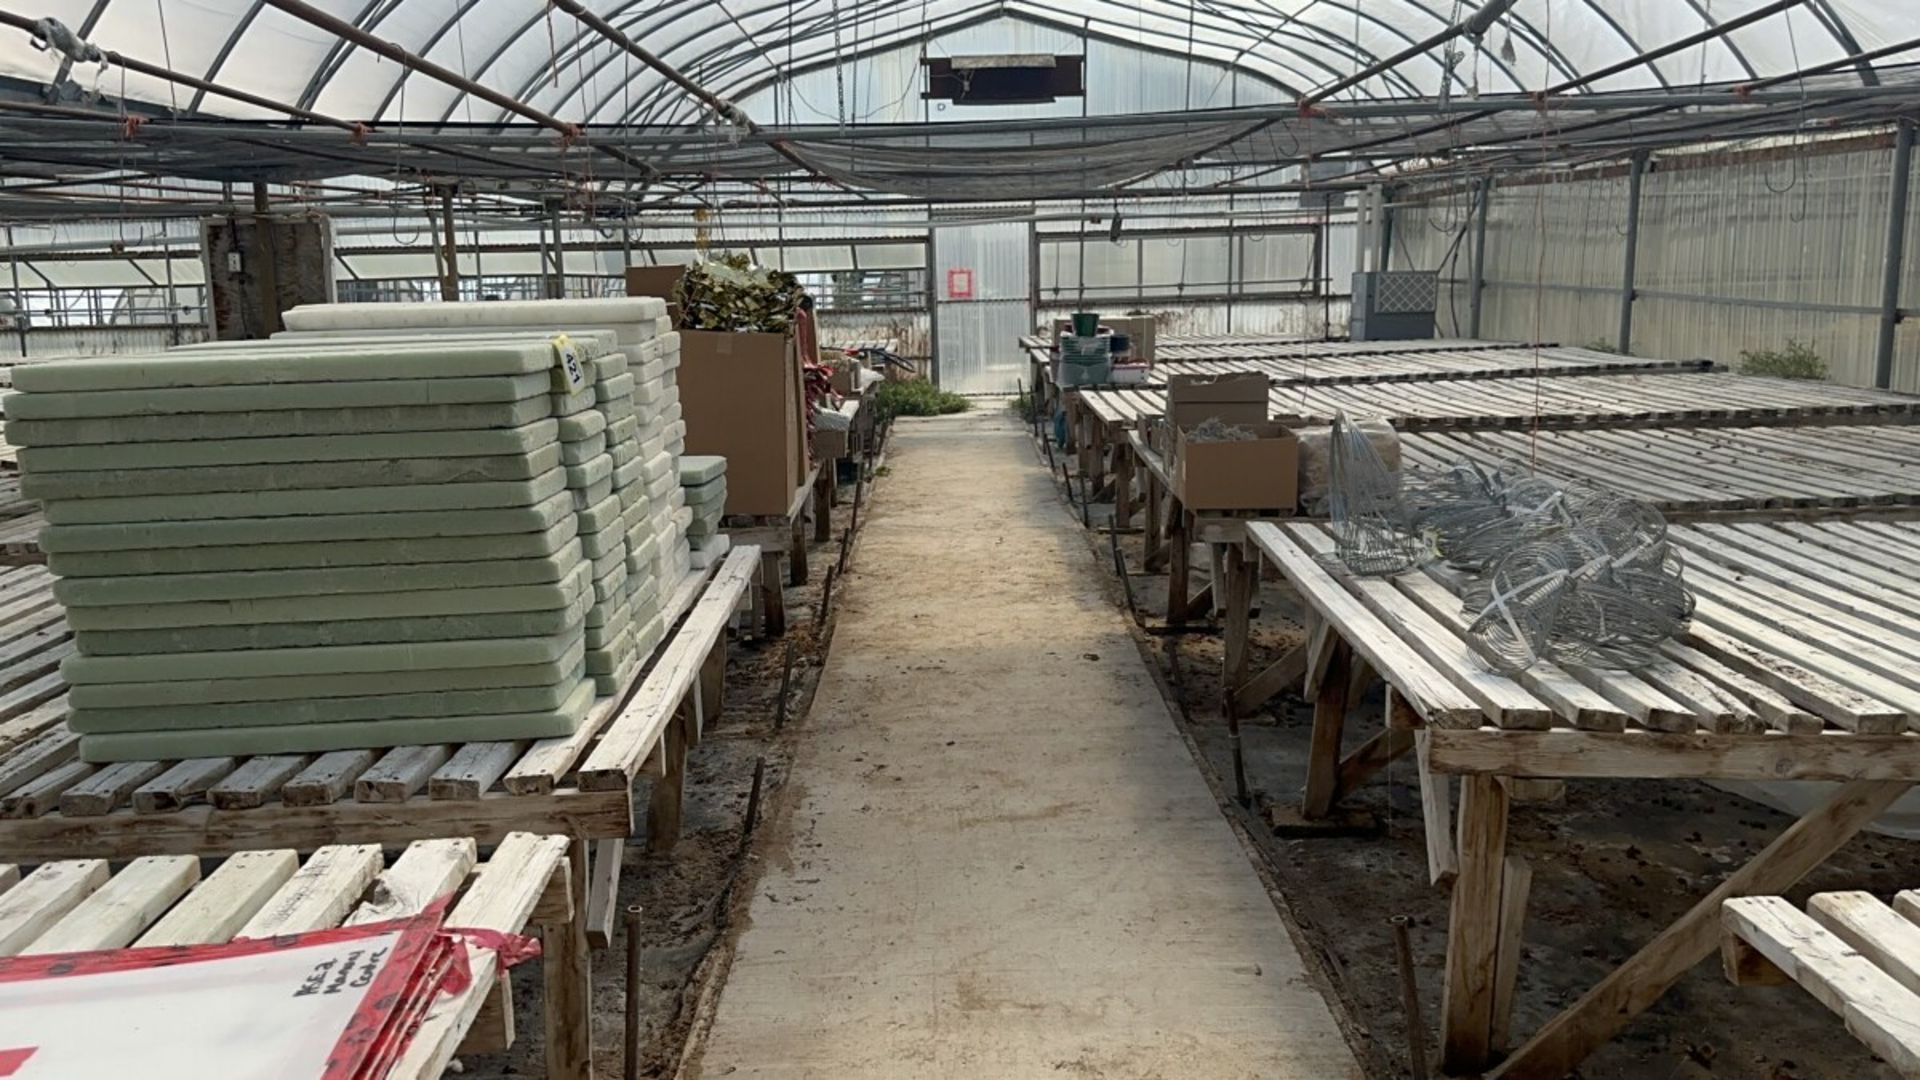 WESTBROOK GUTTER CONNECT 2-BAY GREENHOUSE 60FT X 144FT X 96” H & 2-BAY 60FT X 72 FT X 96”, INCLUDING - Image 85 of 95